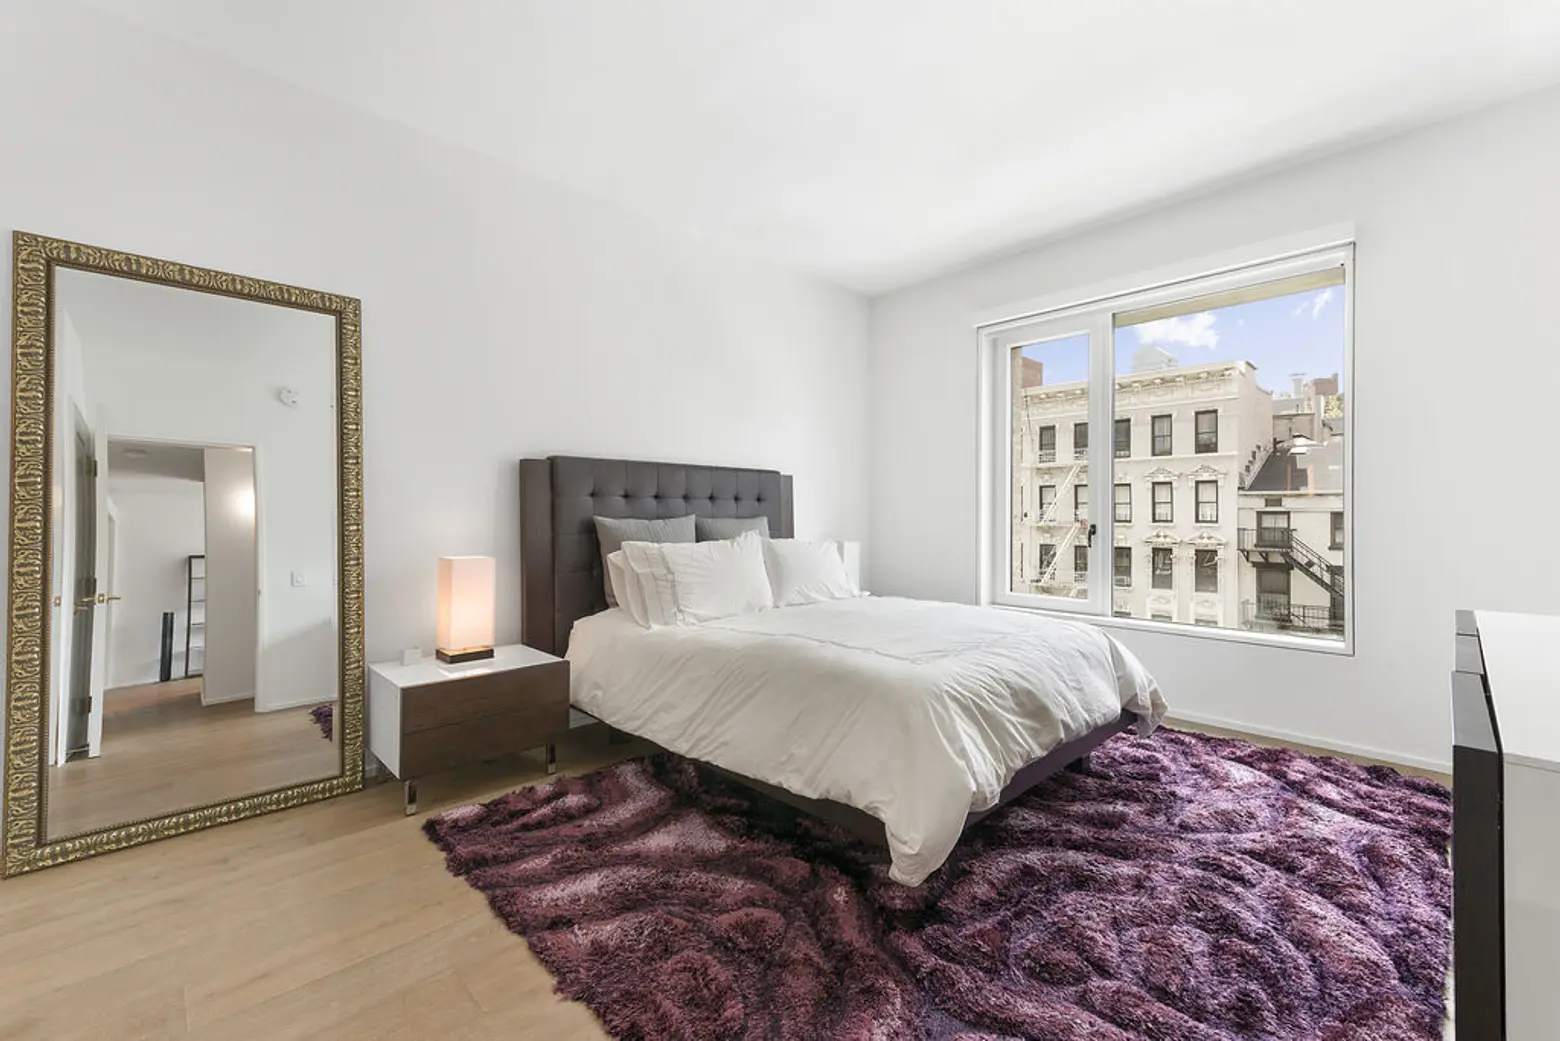 Mats Zuccarello, 345 West 14th Street, Meatpacking District real estate, NYC celebrity real estate